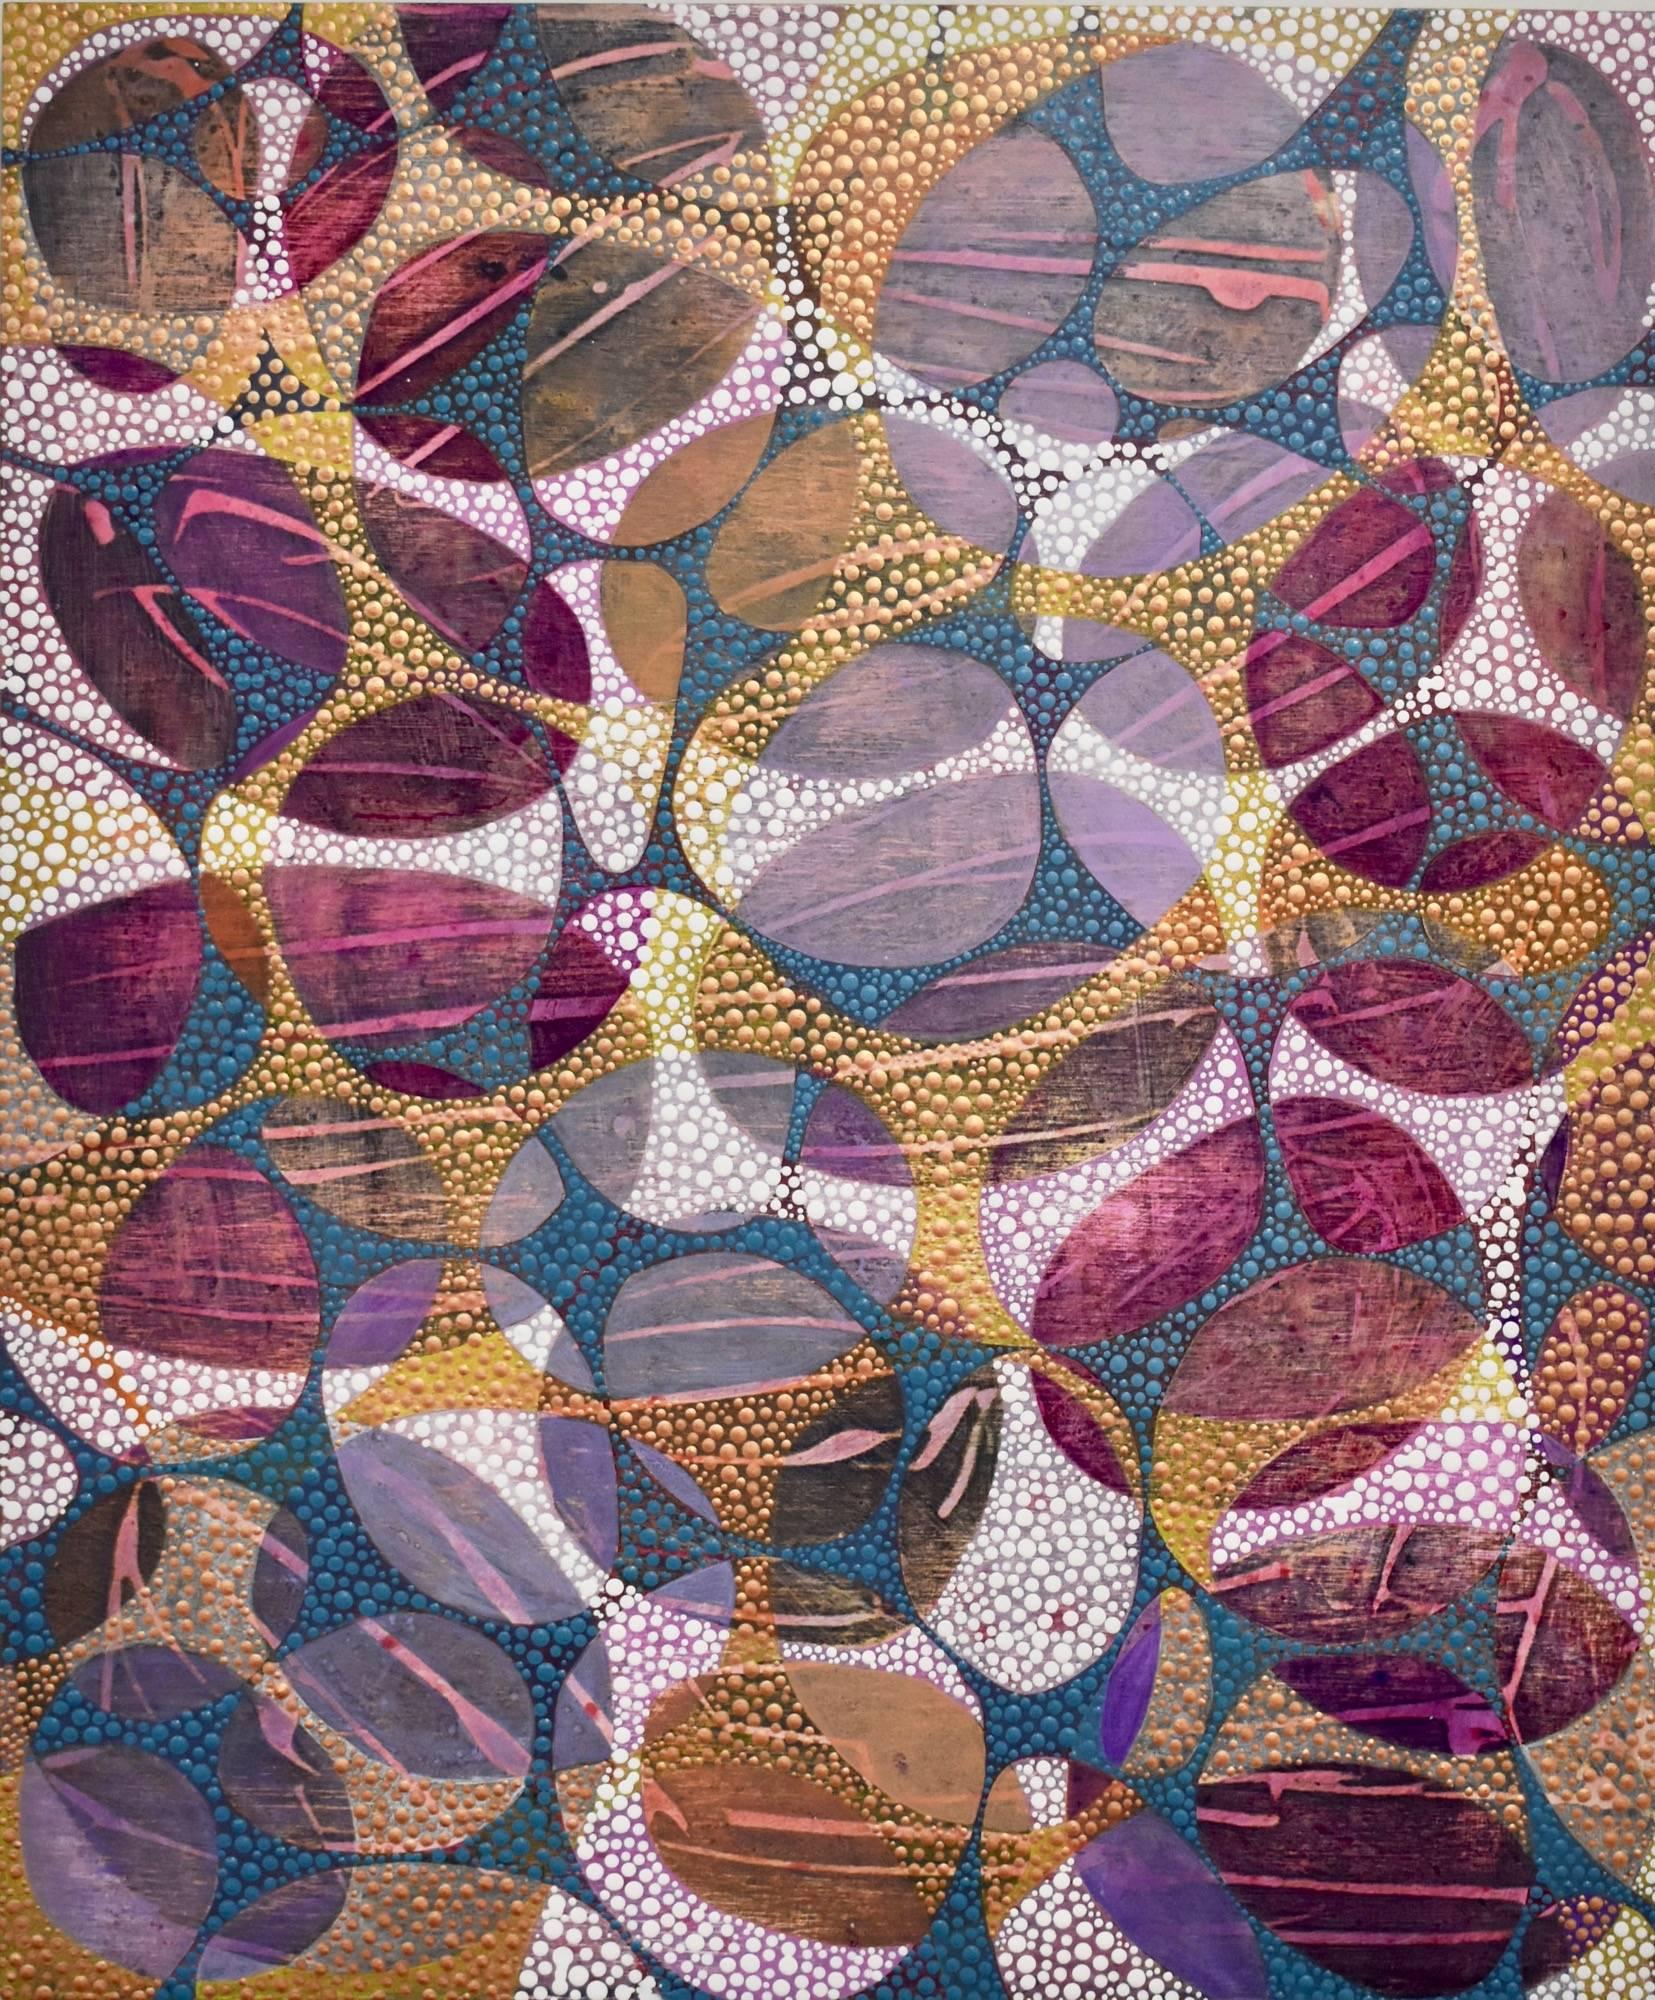 In "Between 10" by Denise Driscoll, is an acrylic painting in which deep teal, rose-gold and white shimmering textured webs are interwoven over a distressed surface of warm plum, wine and mauve. This 24 x 20 x 1.75 inch acrylic painting is on birch